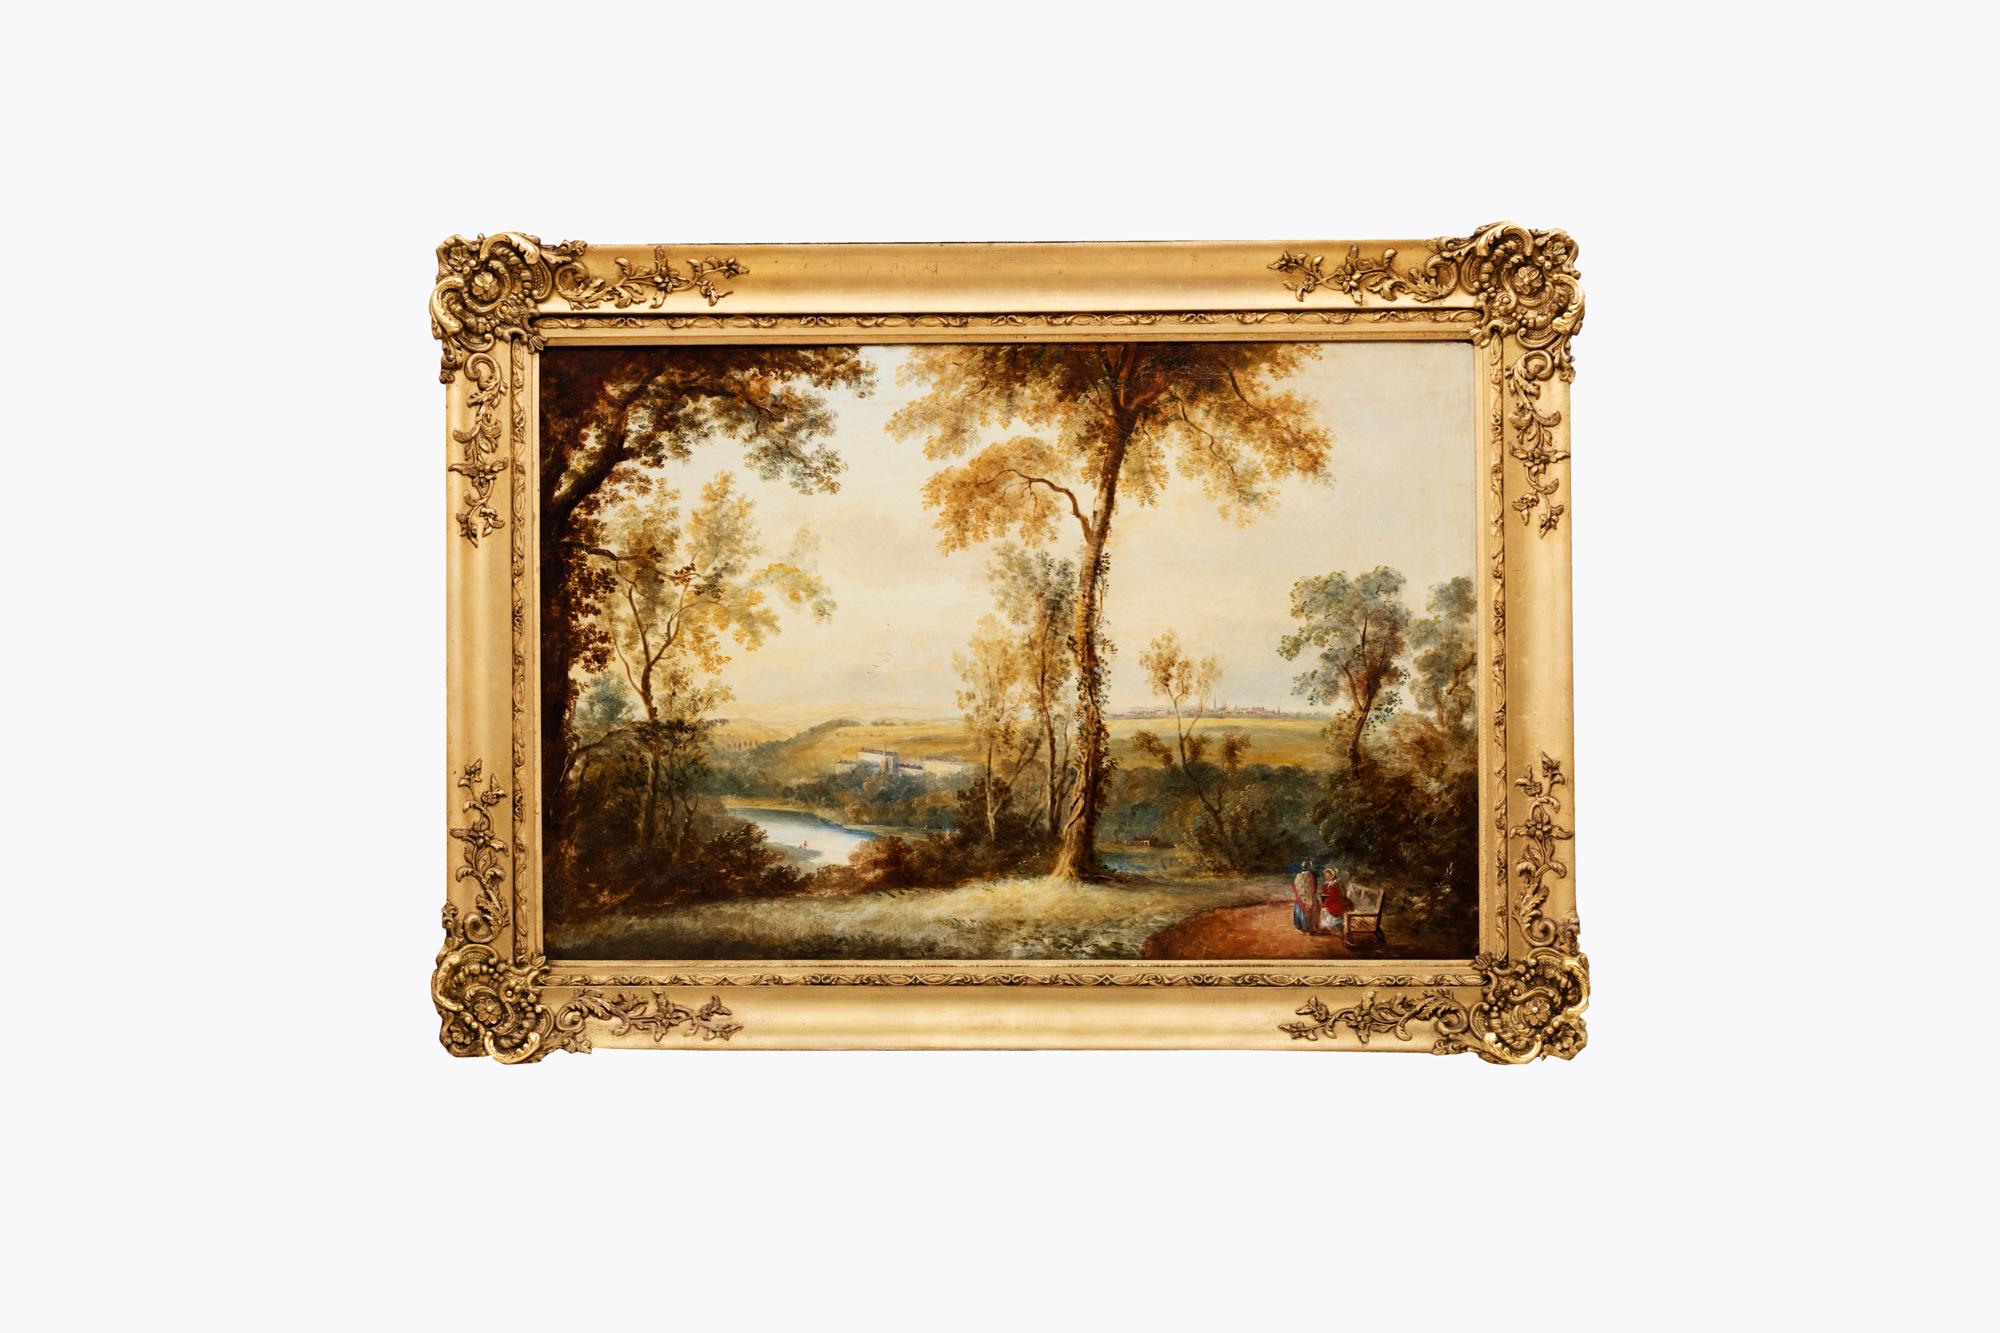 'View of Old and New Lanark', Scotland, circa 1830.

Oil on canvas landscape scene in gilt frame depicting ladies admiring the view of the River Clyde to the foreground with the towns of Lanark and New Lanark in the distance.

Built during the